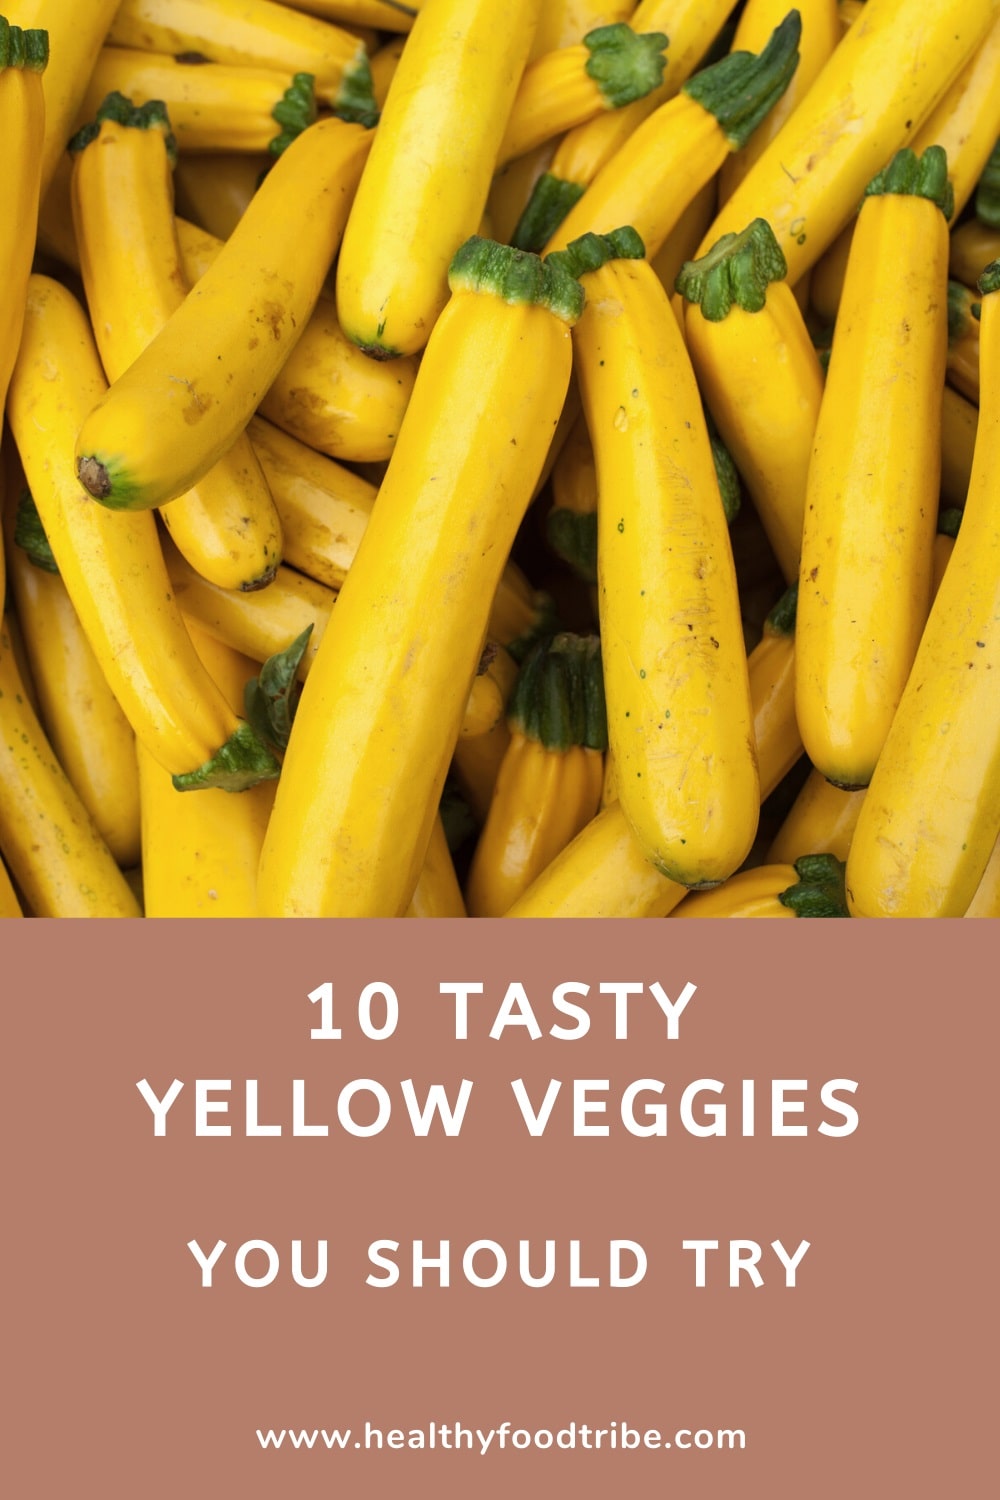 10 Tasty yellow veggies you should try